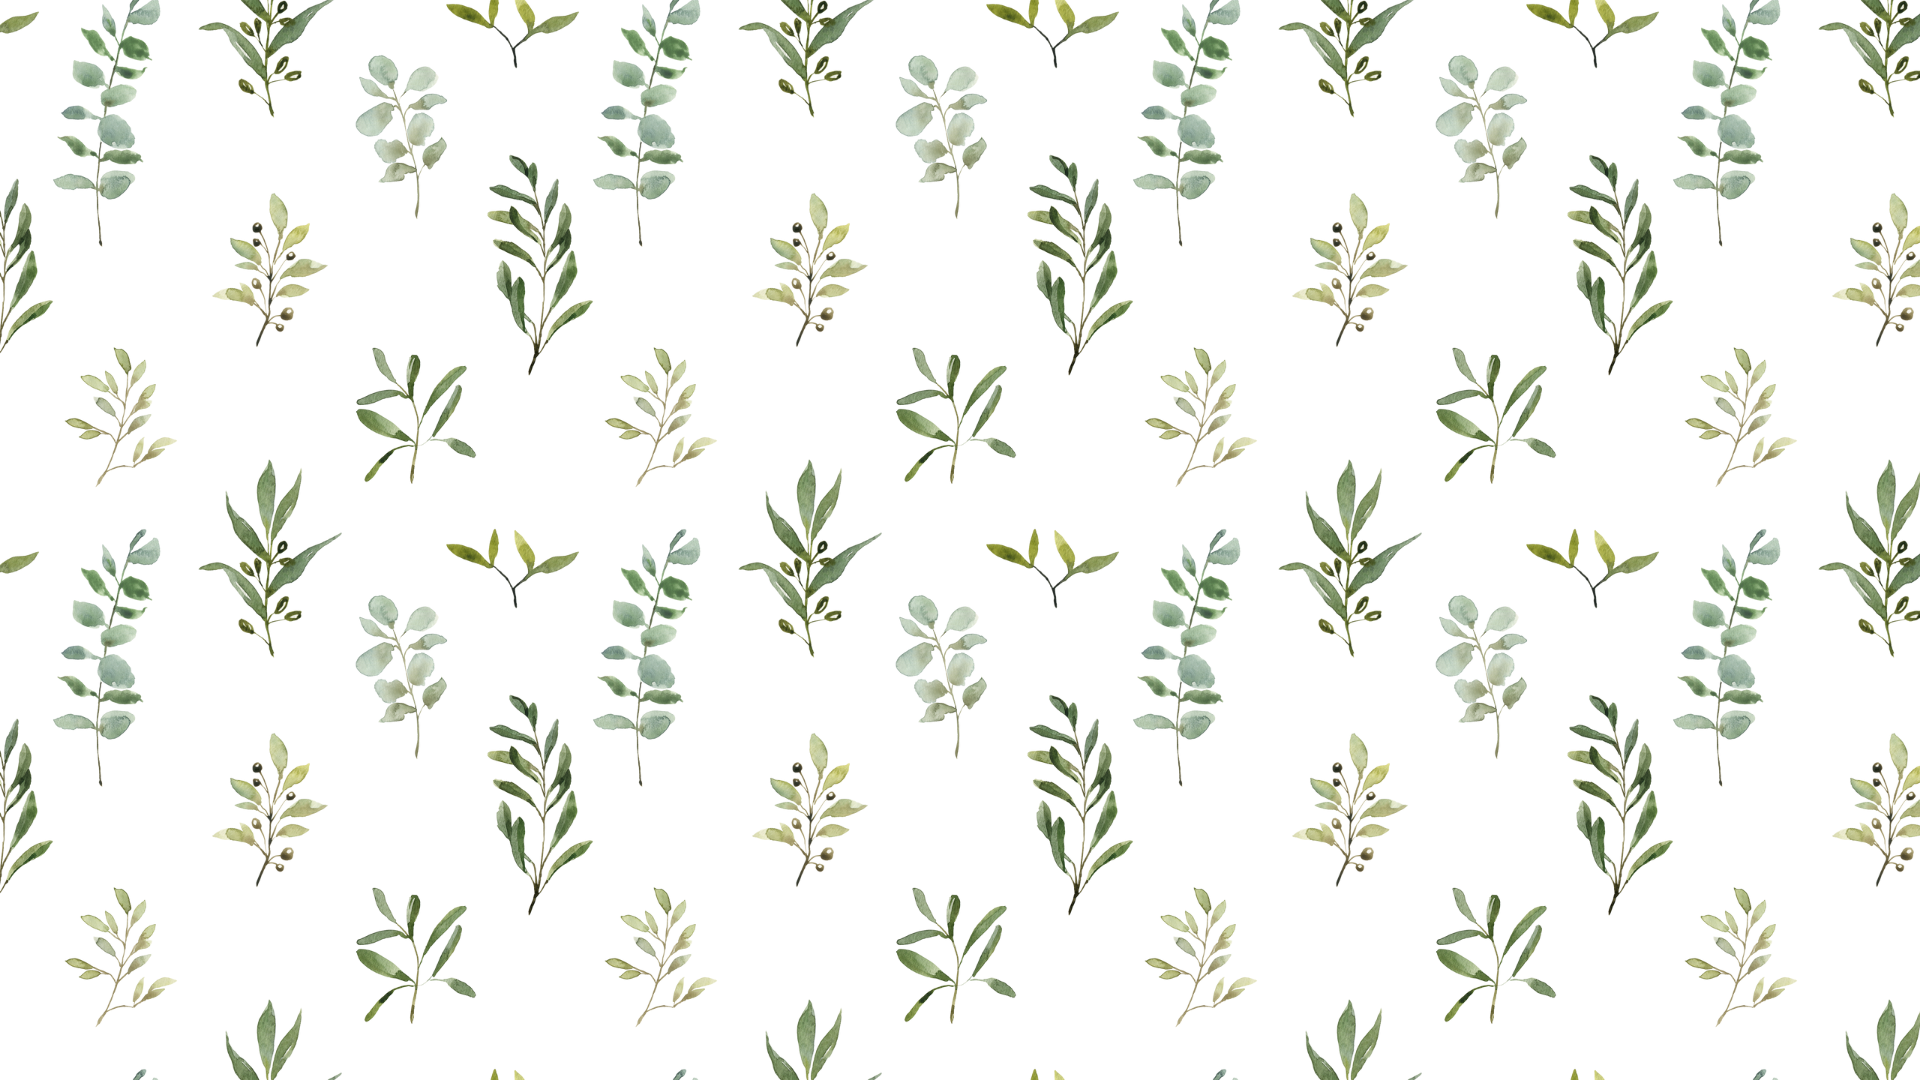 20 Sage Green Aesthetic Wallpaper Backgrounds (FREE)